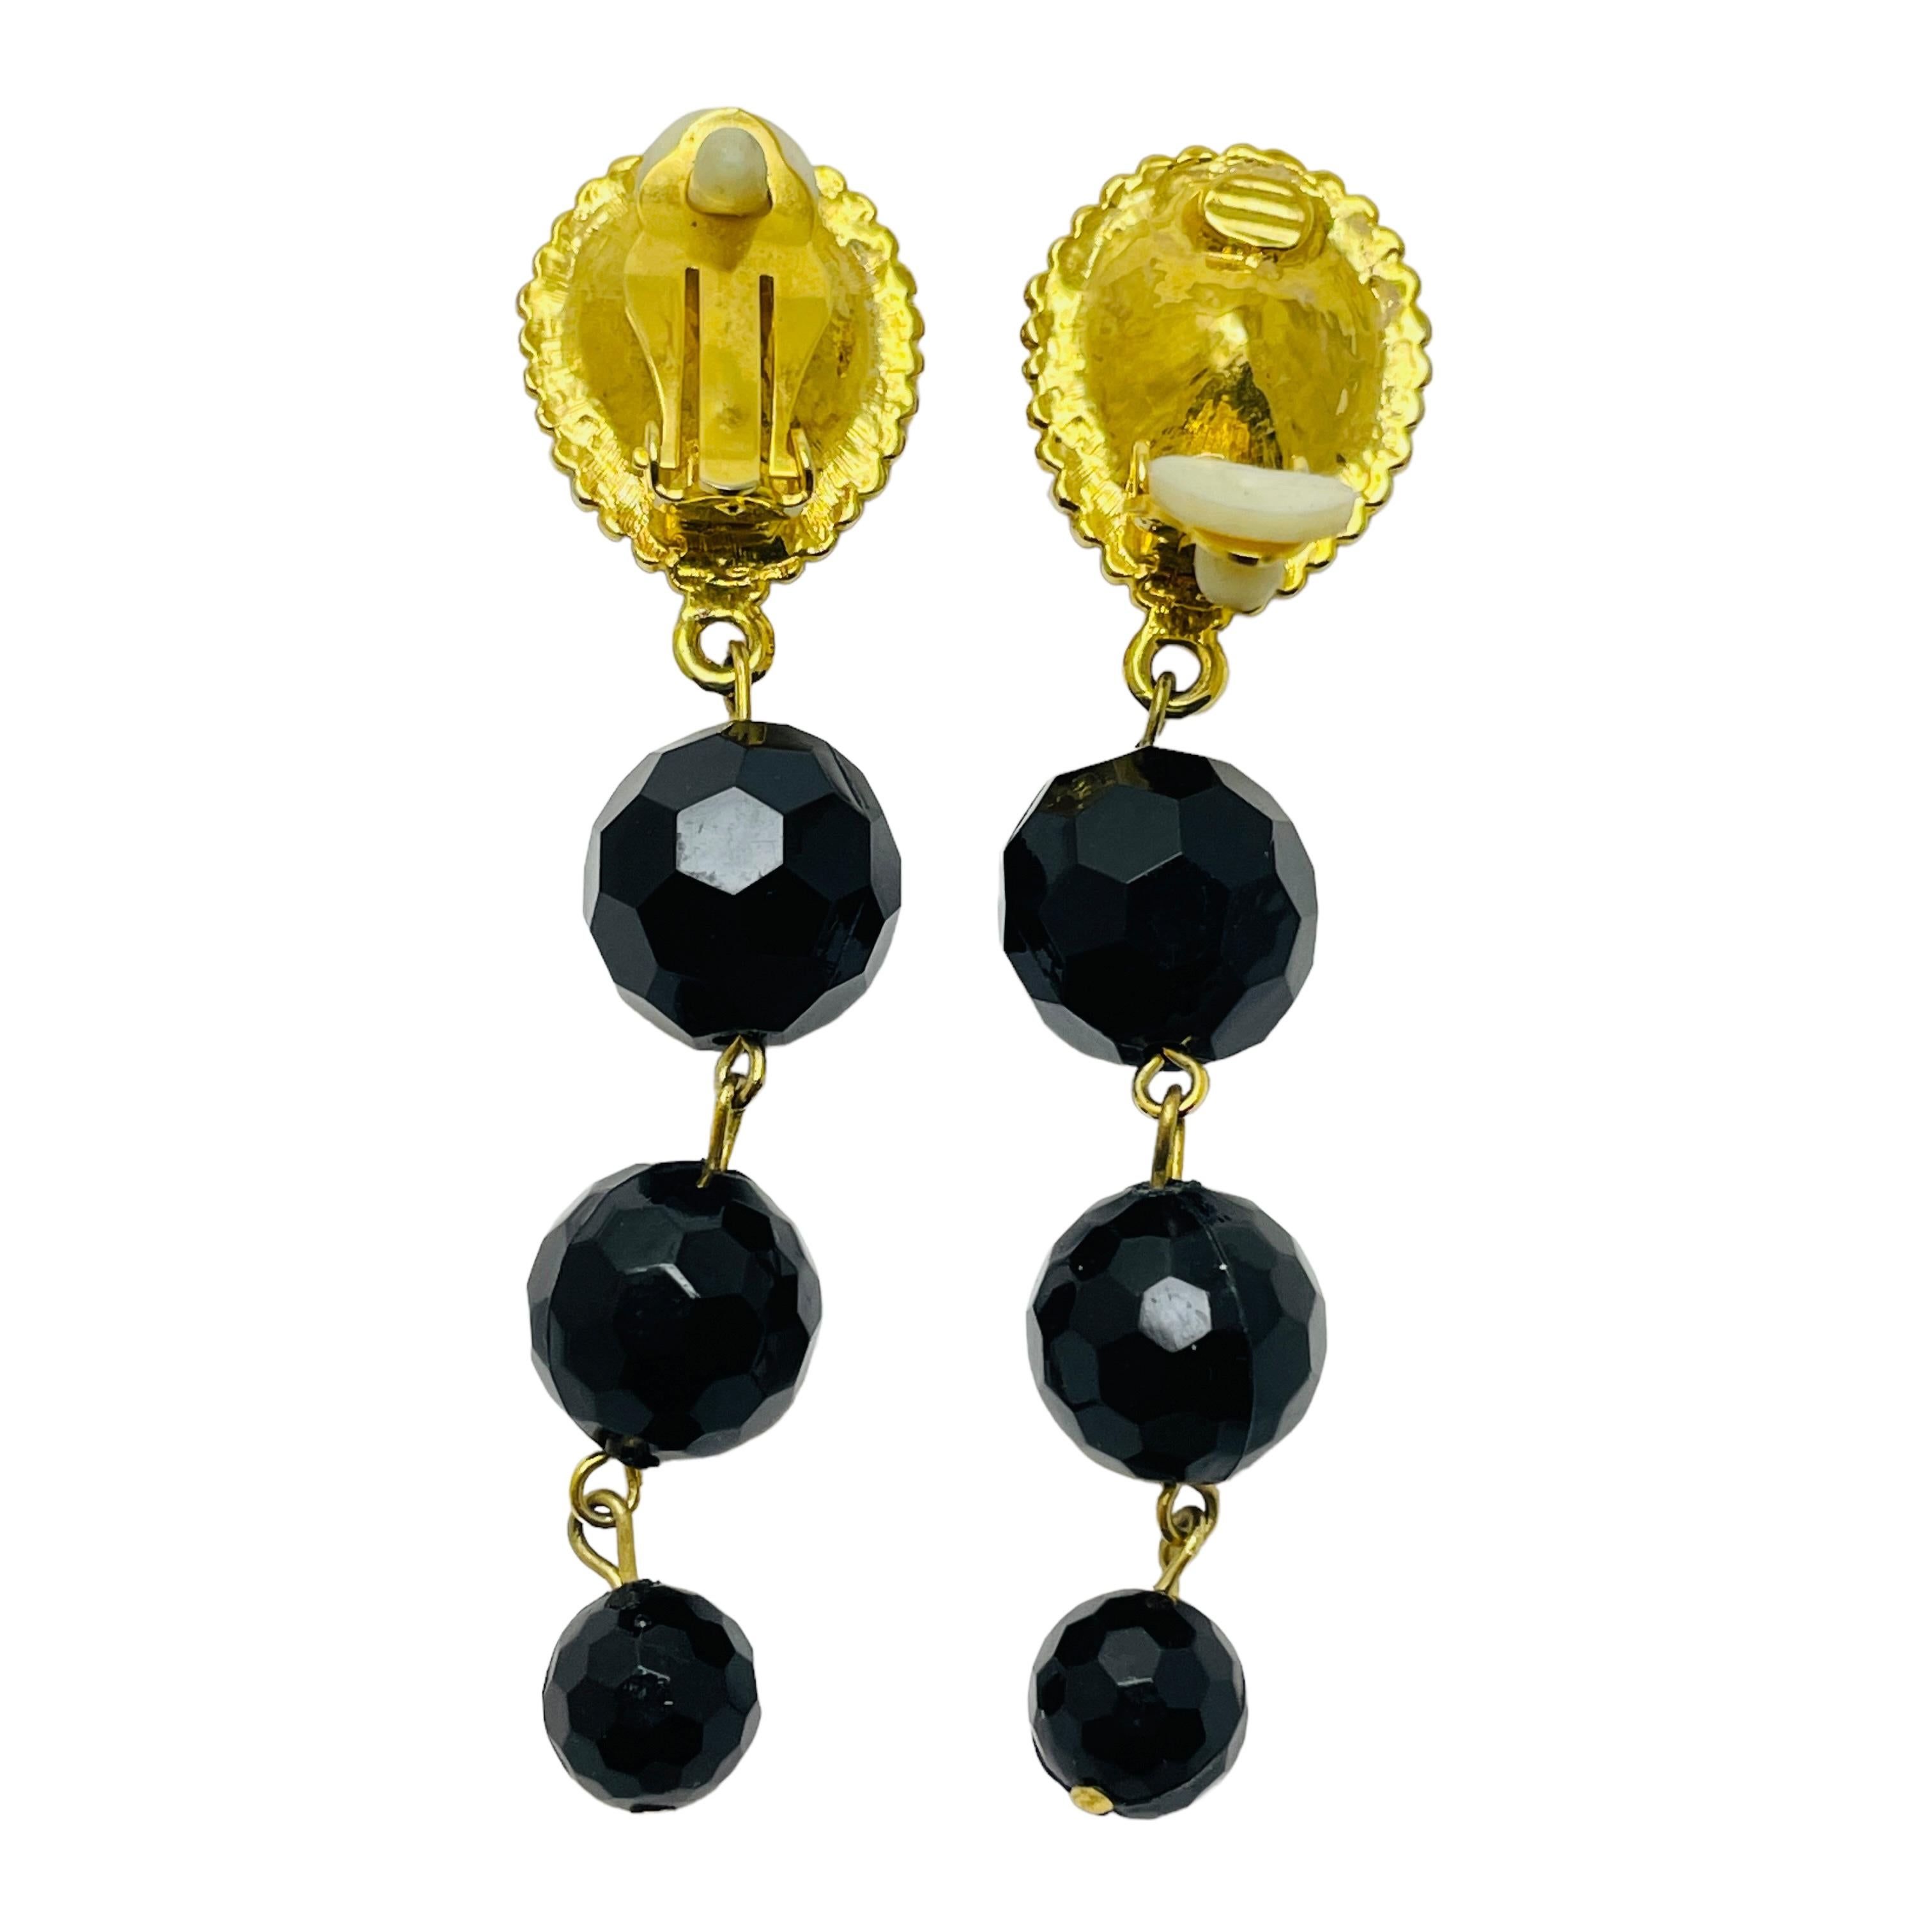 Vintage gold black glass dangle designer runway clip on earrings In Good Condition For Sale In Palos Hills, IL